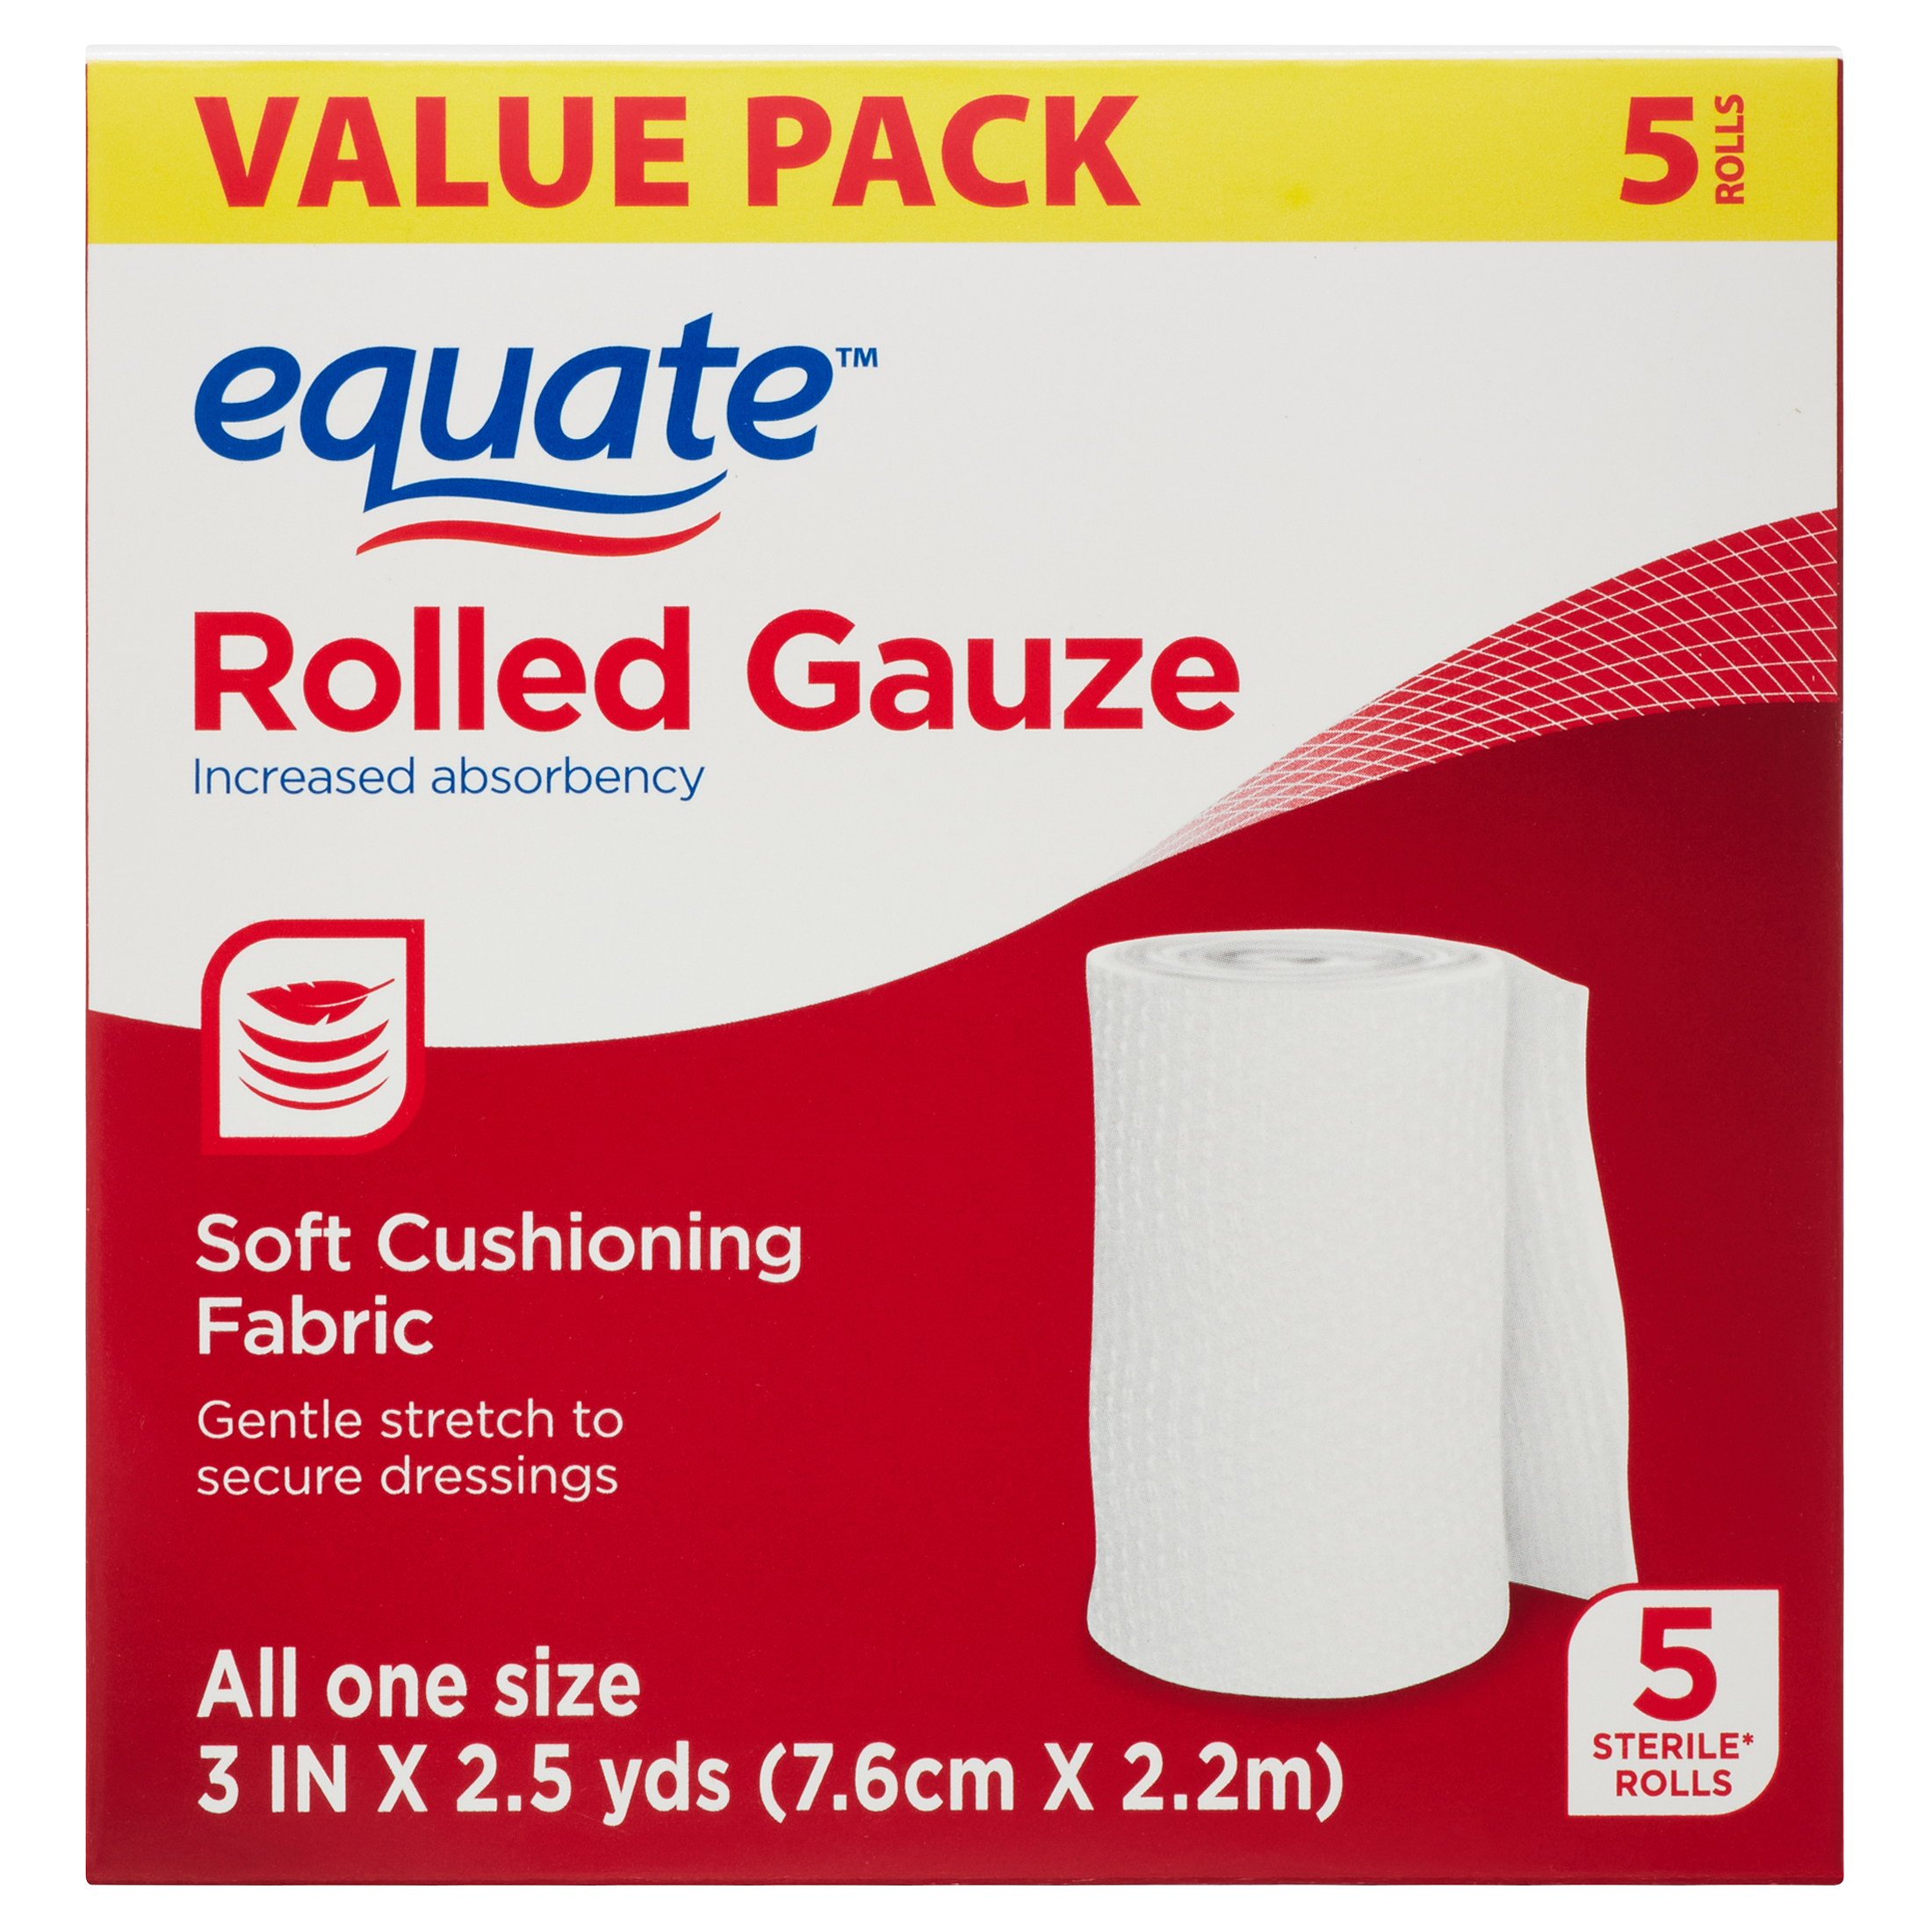 Equate Rolled Gauze, 3" x 2.5 yd, 5 Count - image 1 of 8